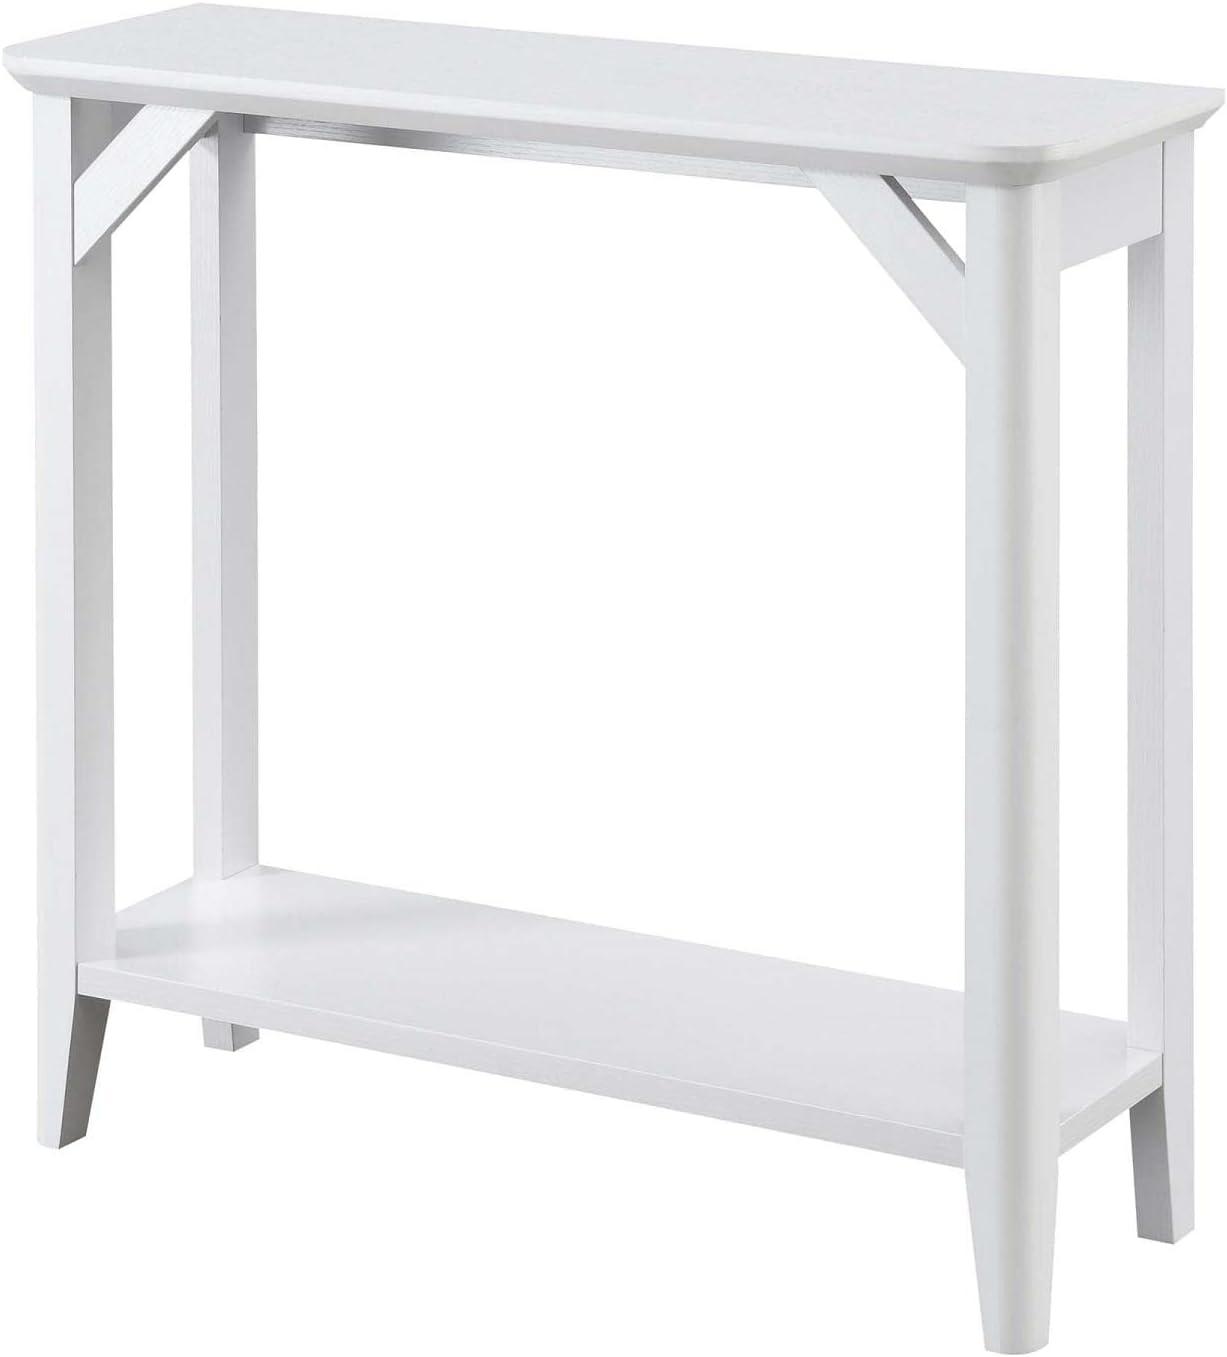 Rustic White Melamine Hall Table with Dual Shelves